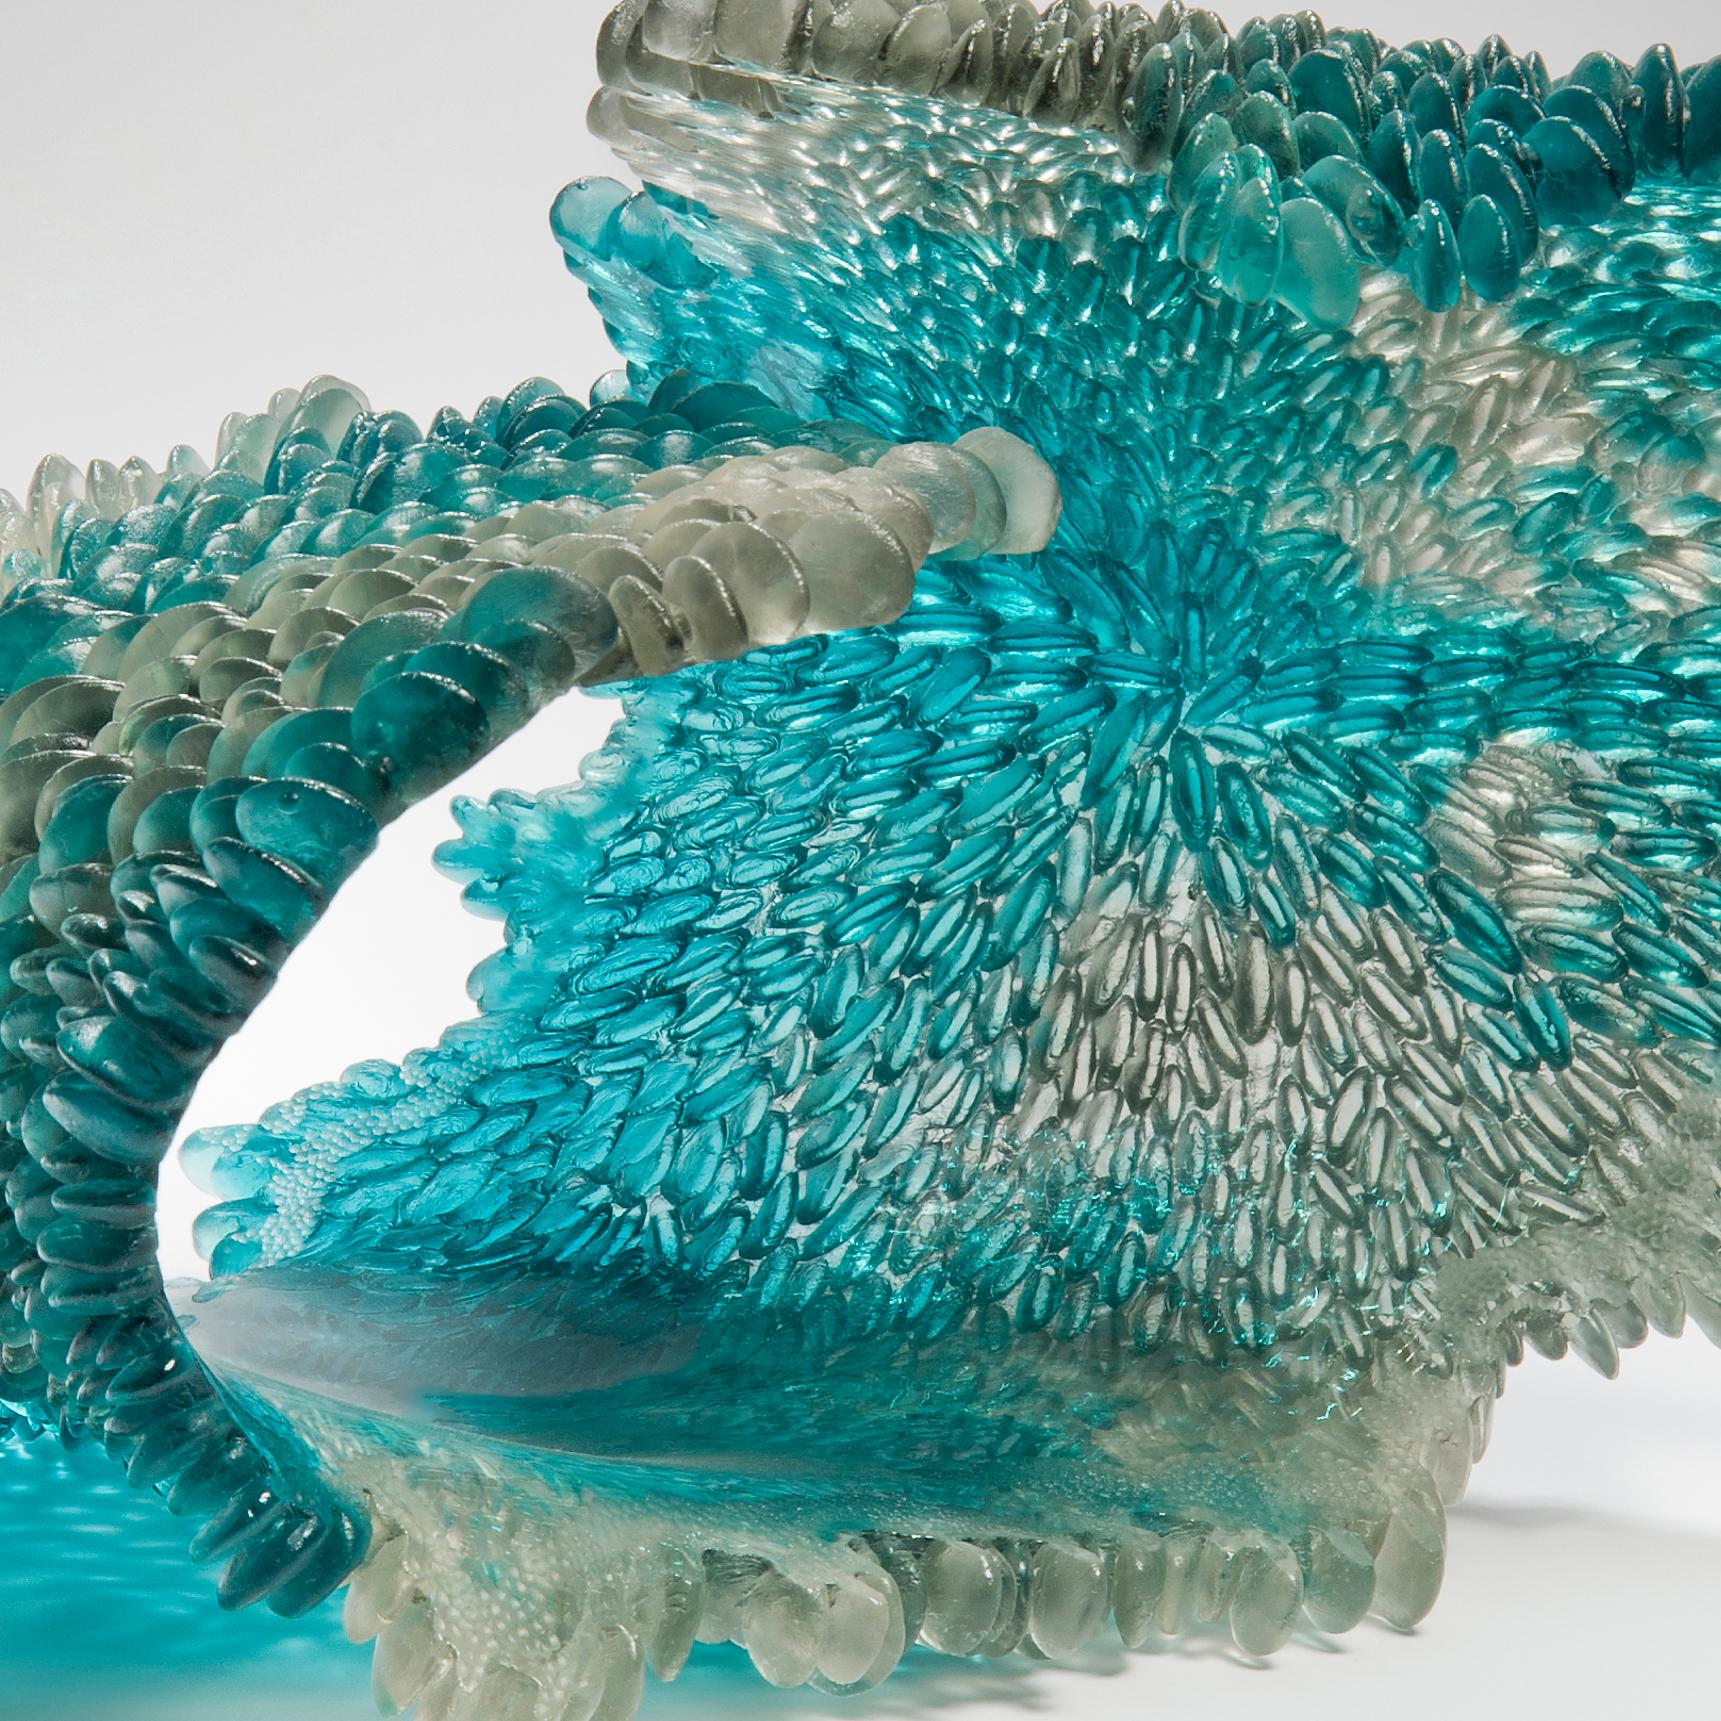 British Alliform II, a Unique Glass Sculpture in Clear and Teal by Nina Casson McGarva